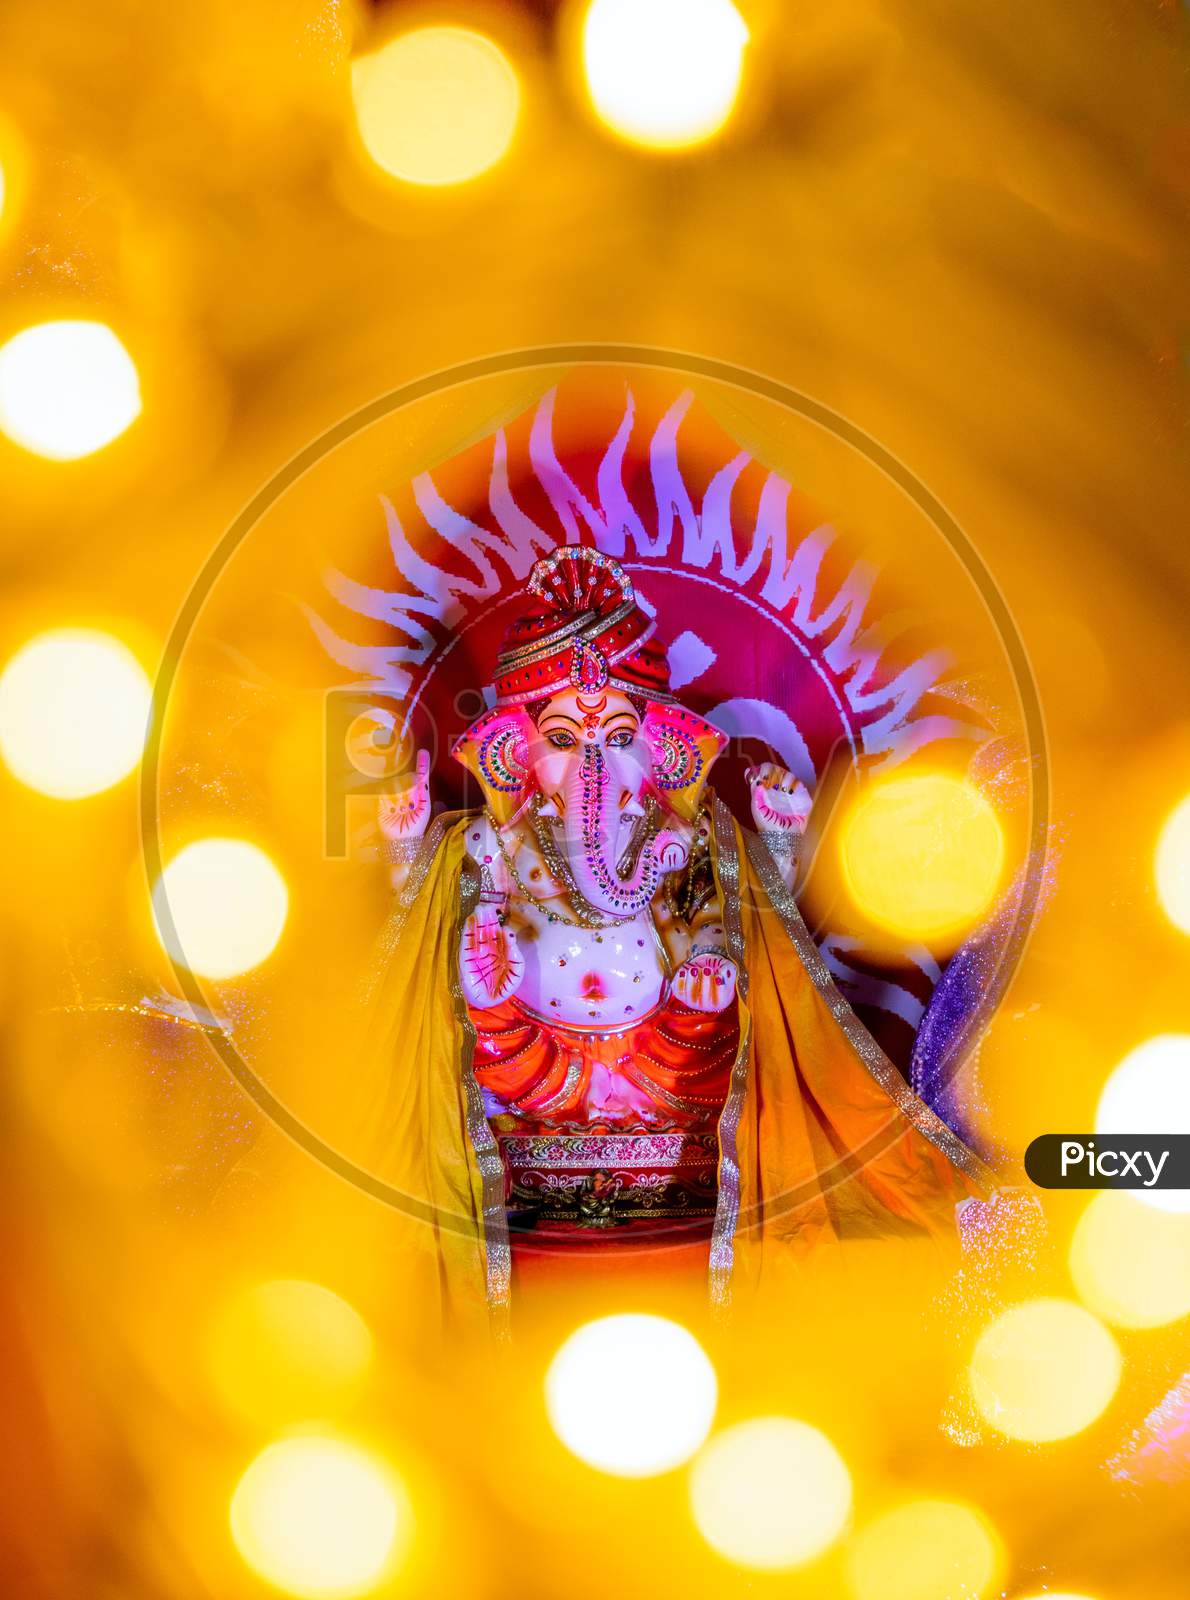 Lord Ganesh is worshiped first before starting anything new. Lord Ganesha clears the obstacles and paves the way for us to move forward in life. · The large elephant head of Lord Ganesha symbolizes wisdom, understanding, and a discriminating intellect that one must possess to attain perfection in li